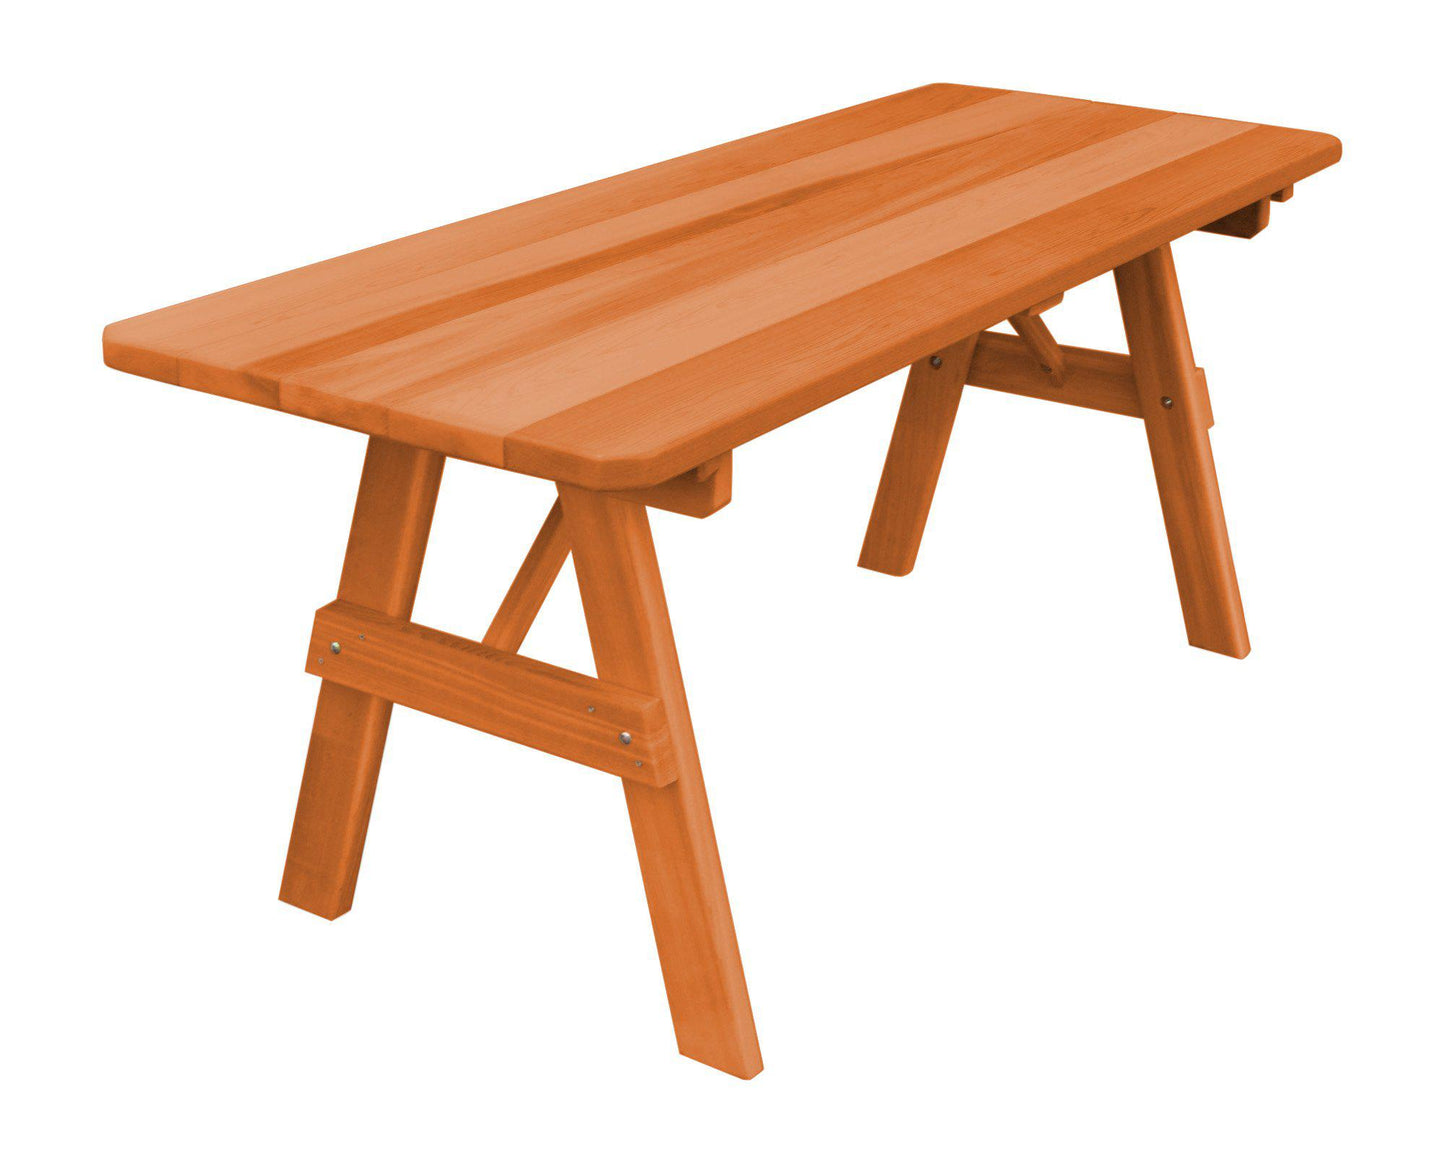 A&L FURNITURE CO.Western Red Cedar 70" Traditional Table Only - Specify for FREE 2" Umbrella Hole - LEAD TIME TO SHIP 2 WEEKS